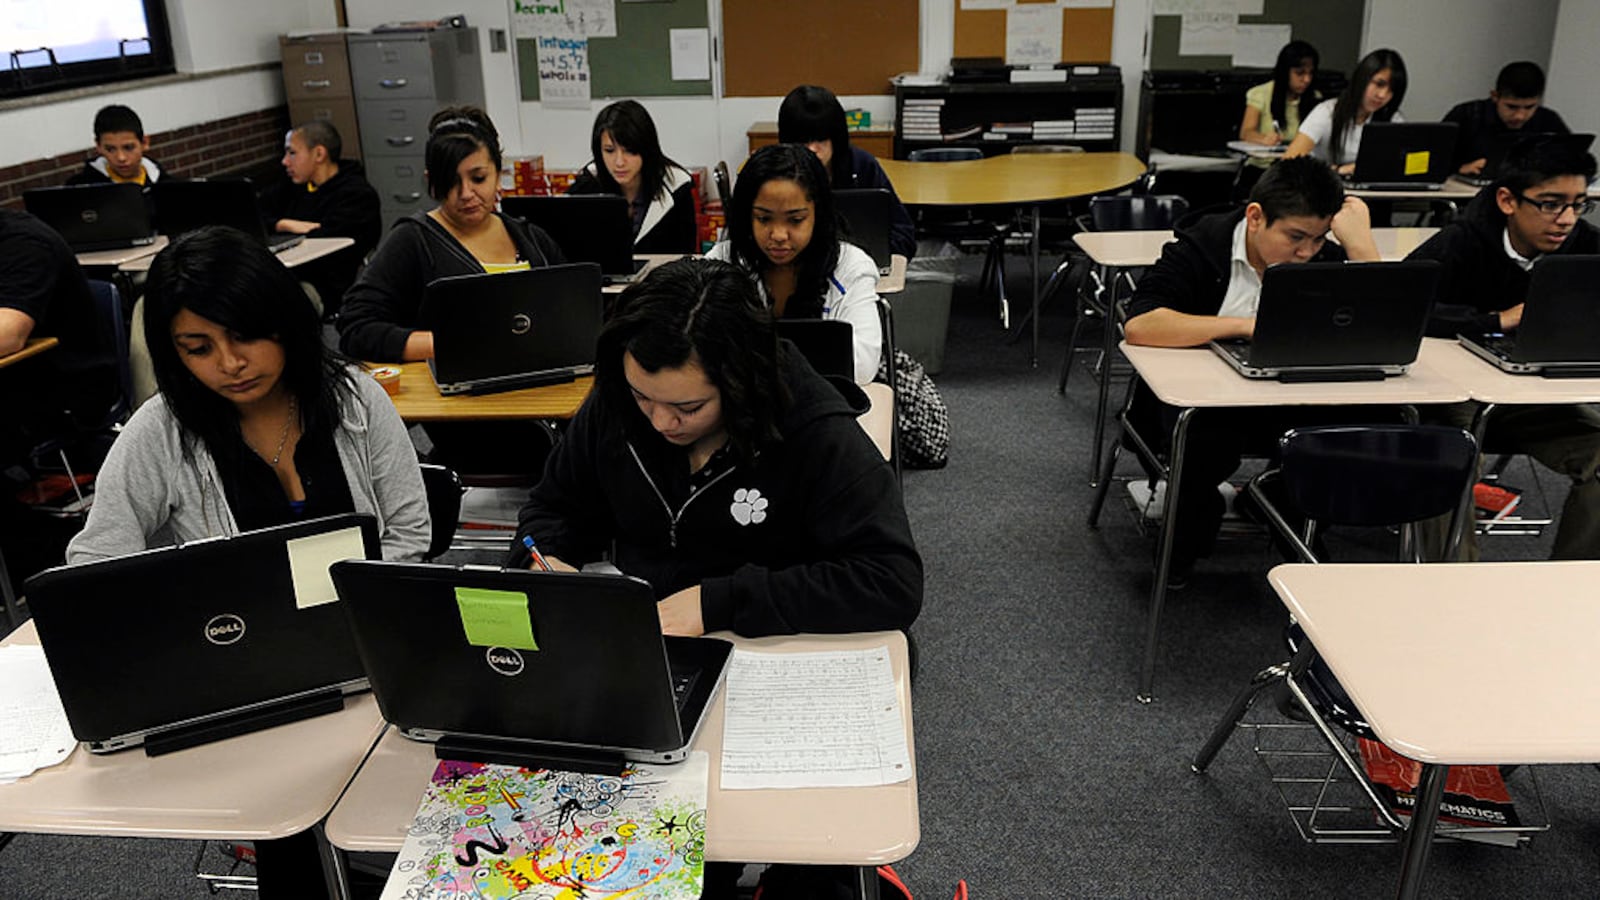 Students at work on laptops as they take an online math class in Commerce City, Colorado in 2012.